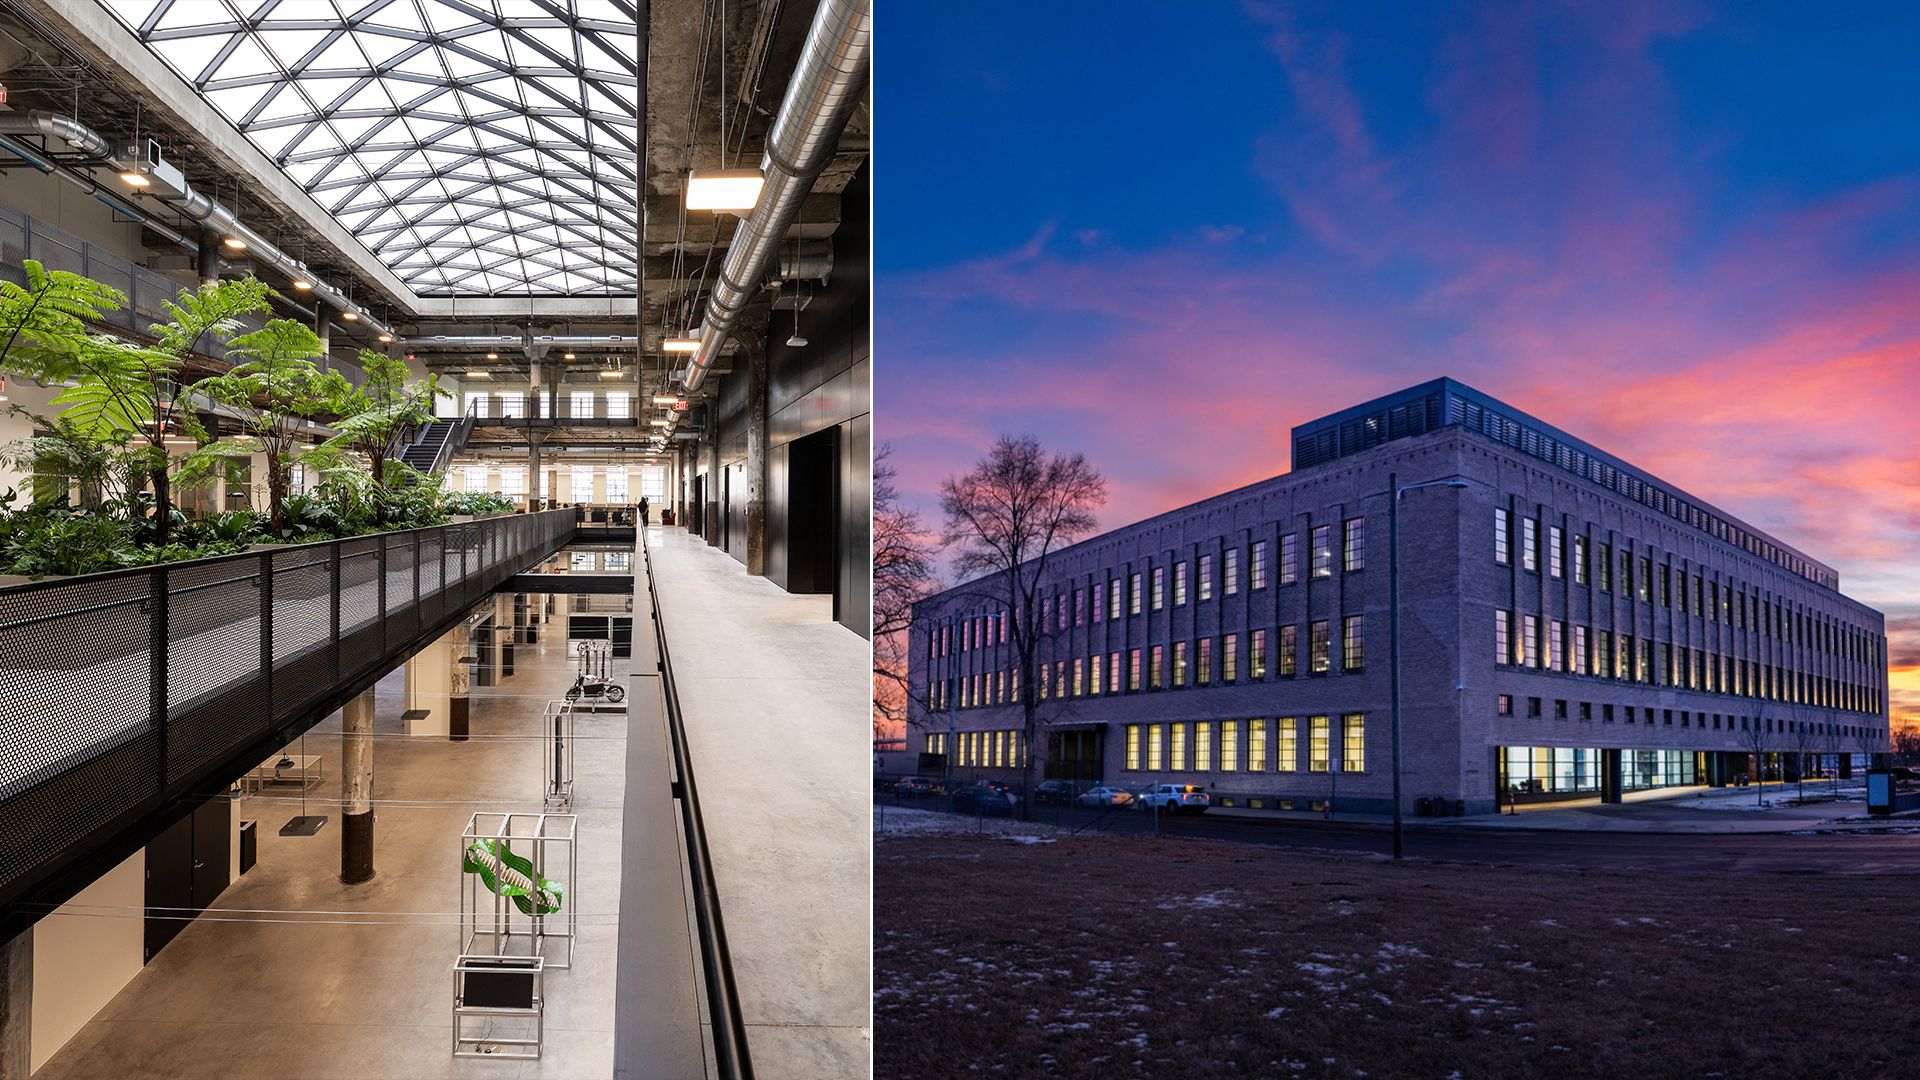 Images of the interior and exterior of the reimagined Book Depository Building in Detroit, which will house transportation researchers.